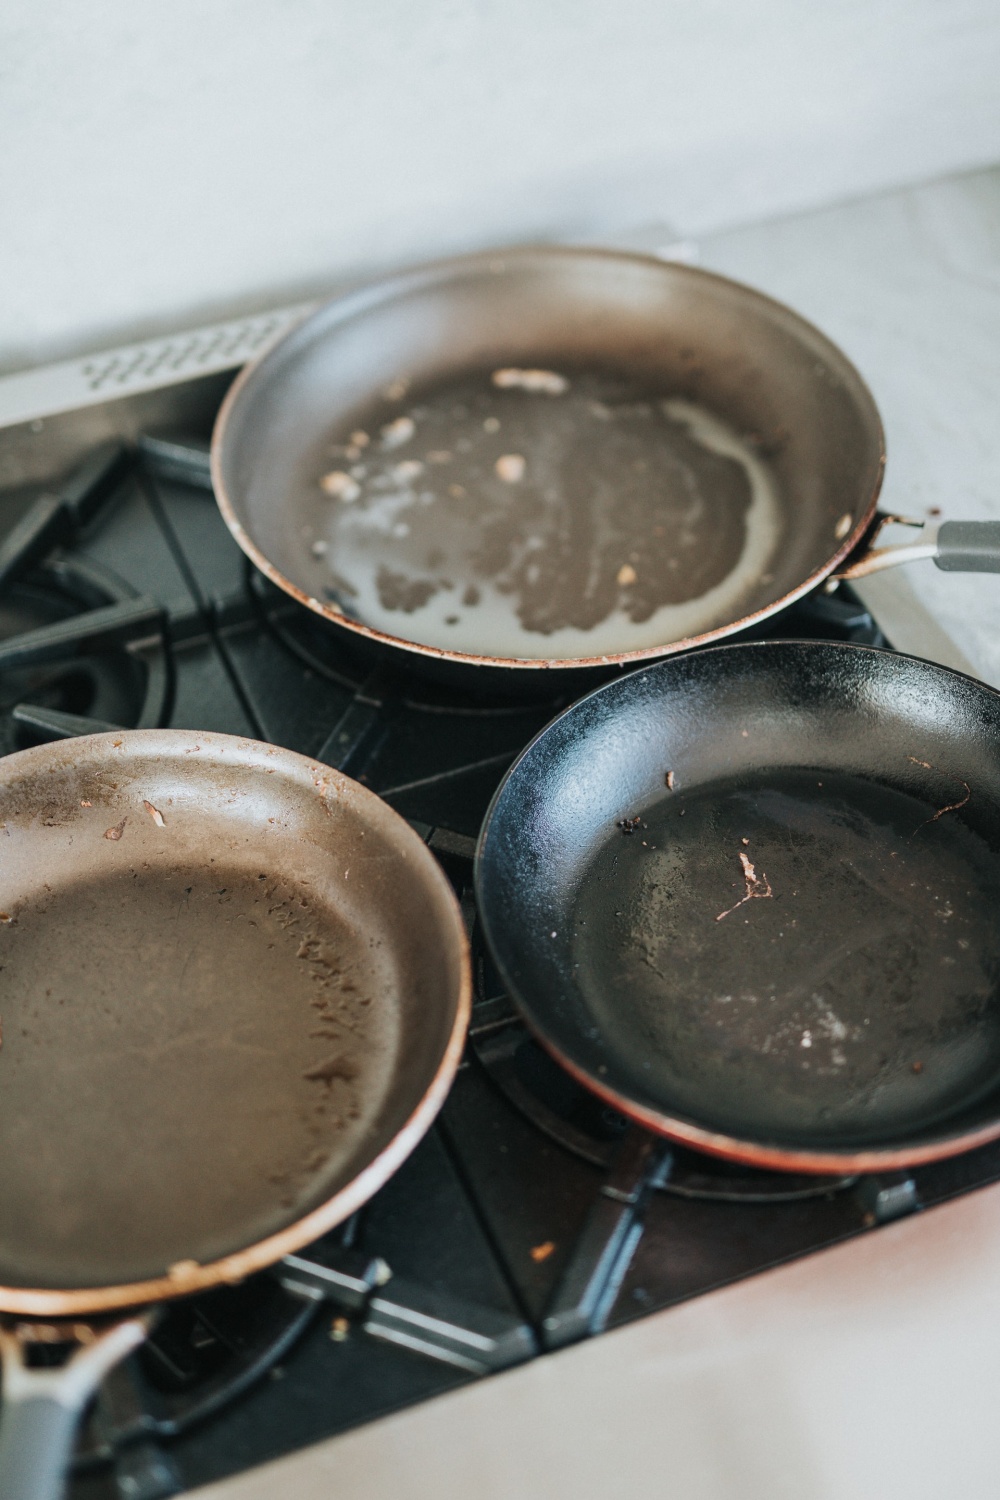 Teflon non-stick pans could release millions of microplastic